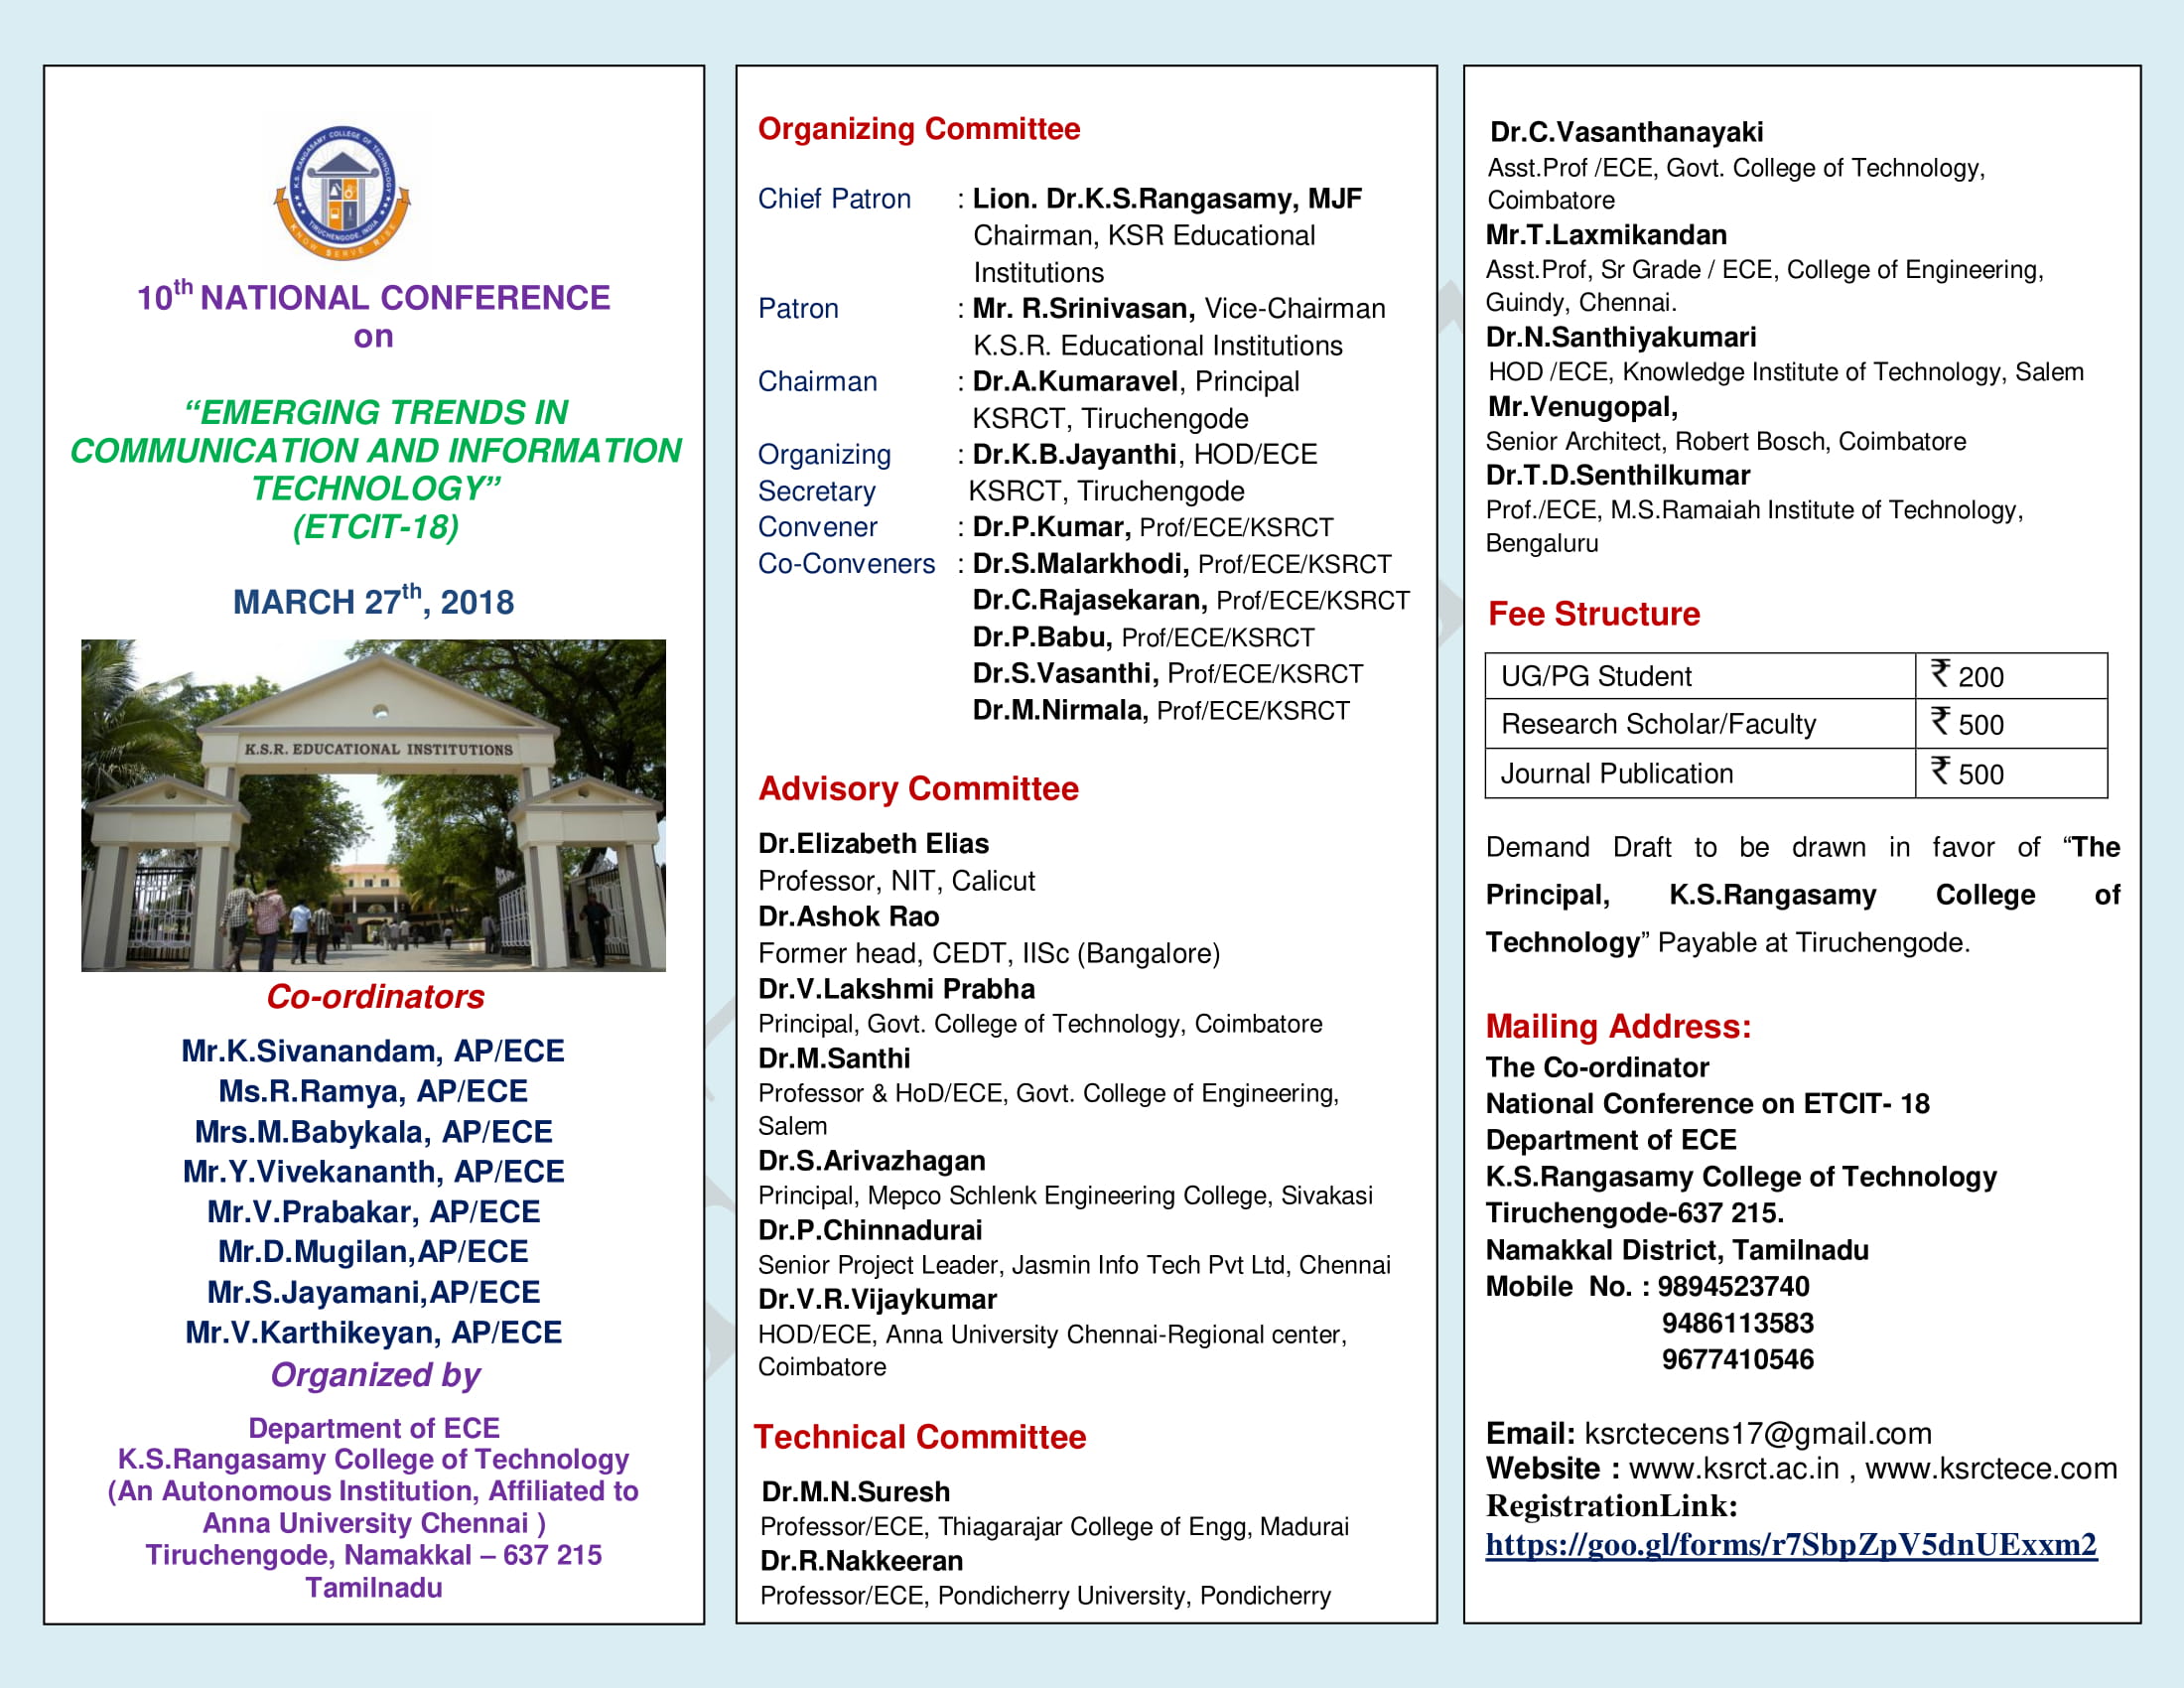 10th National Conference on Emerging Trends in Communication and information Technology ETCIT 18